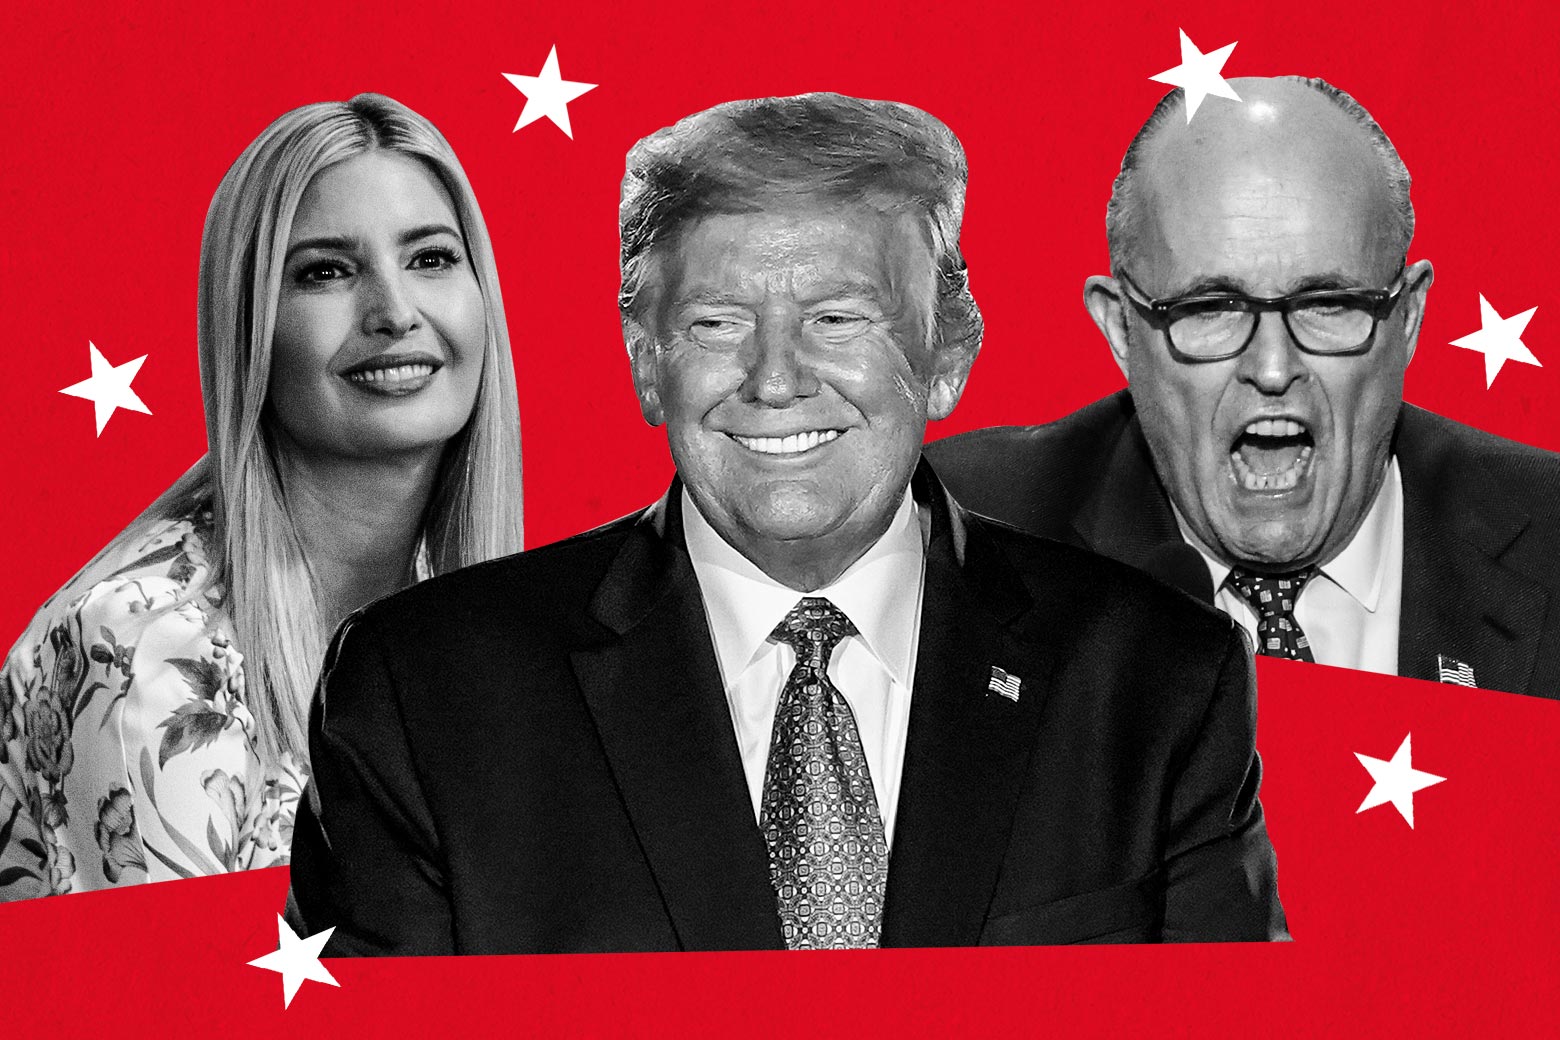 Ivanka Trump, Donald Trump, and Rudy Giuliani seen against a red background surrounded by white stars.